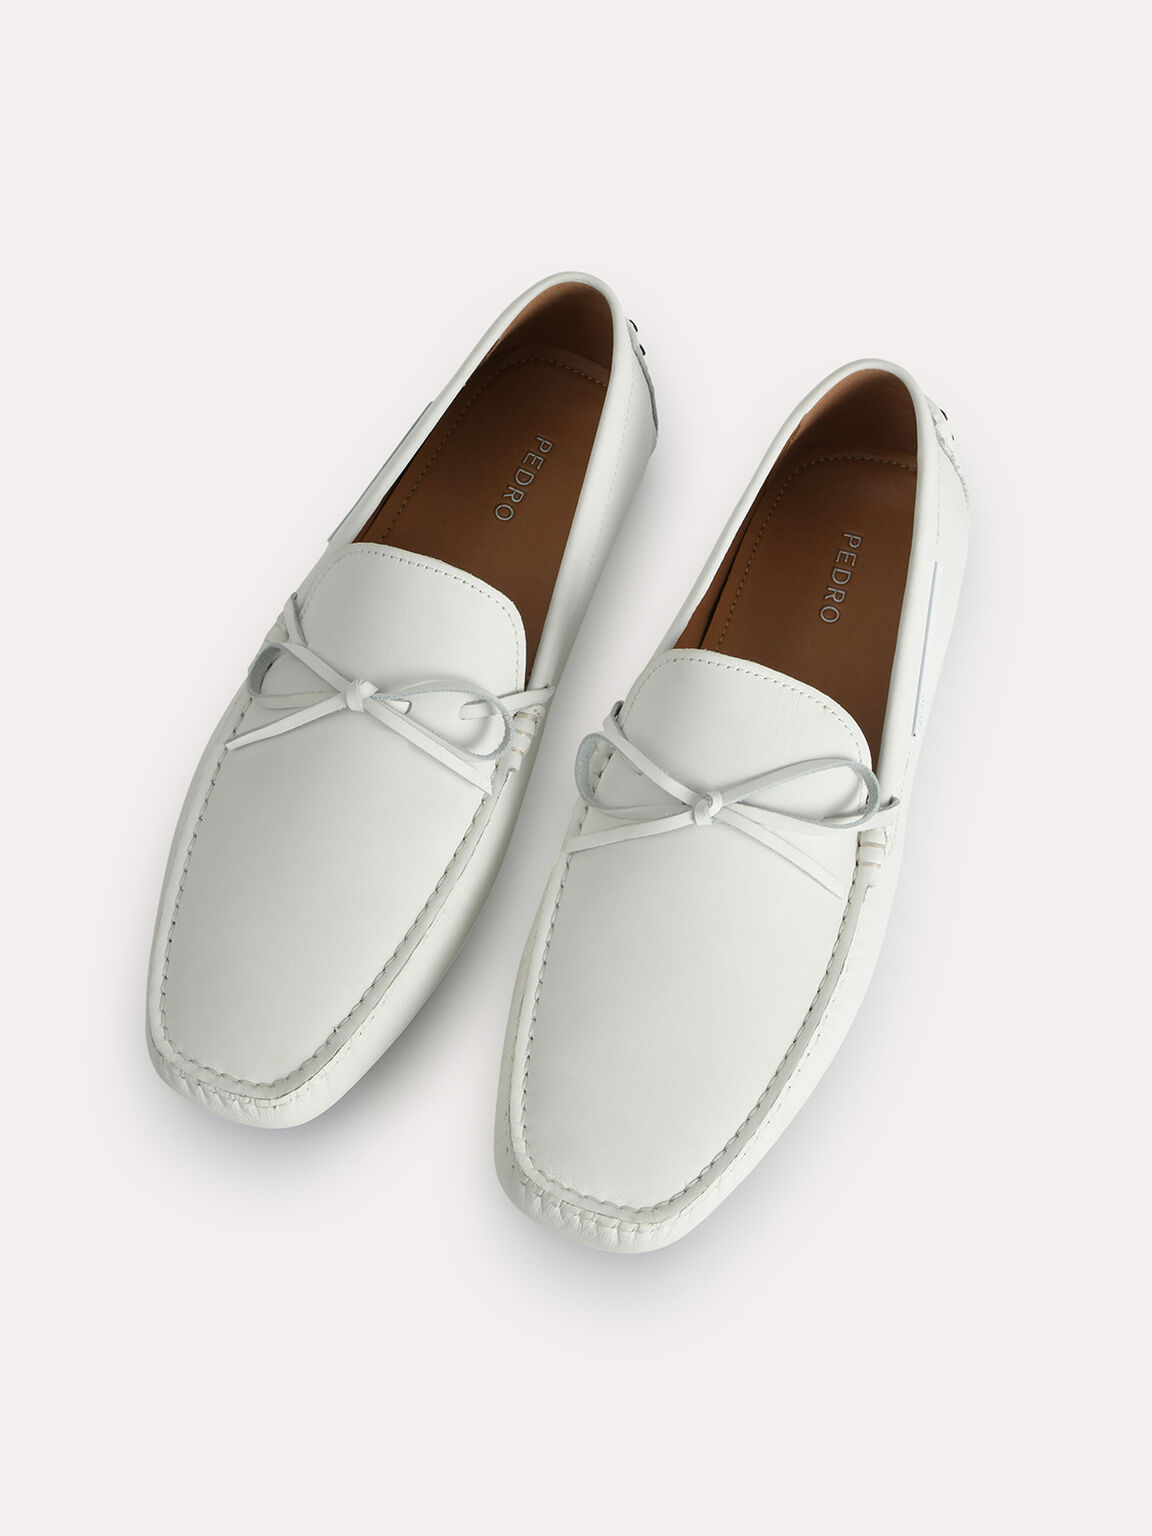 Leather Moccasins with Bow Detailing, White